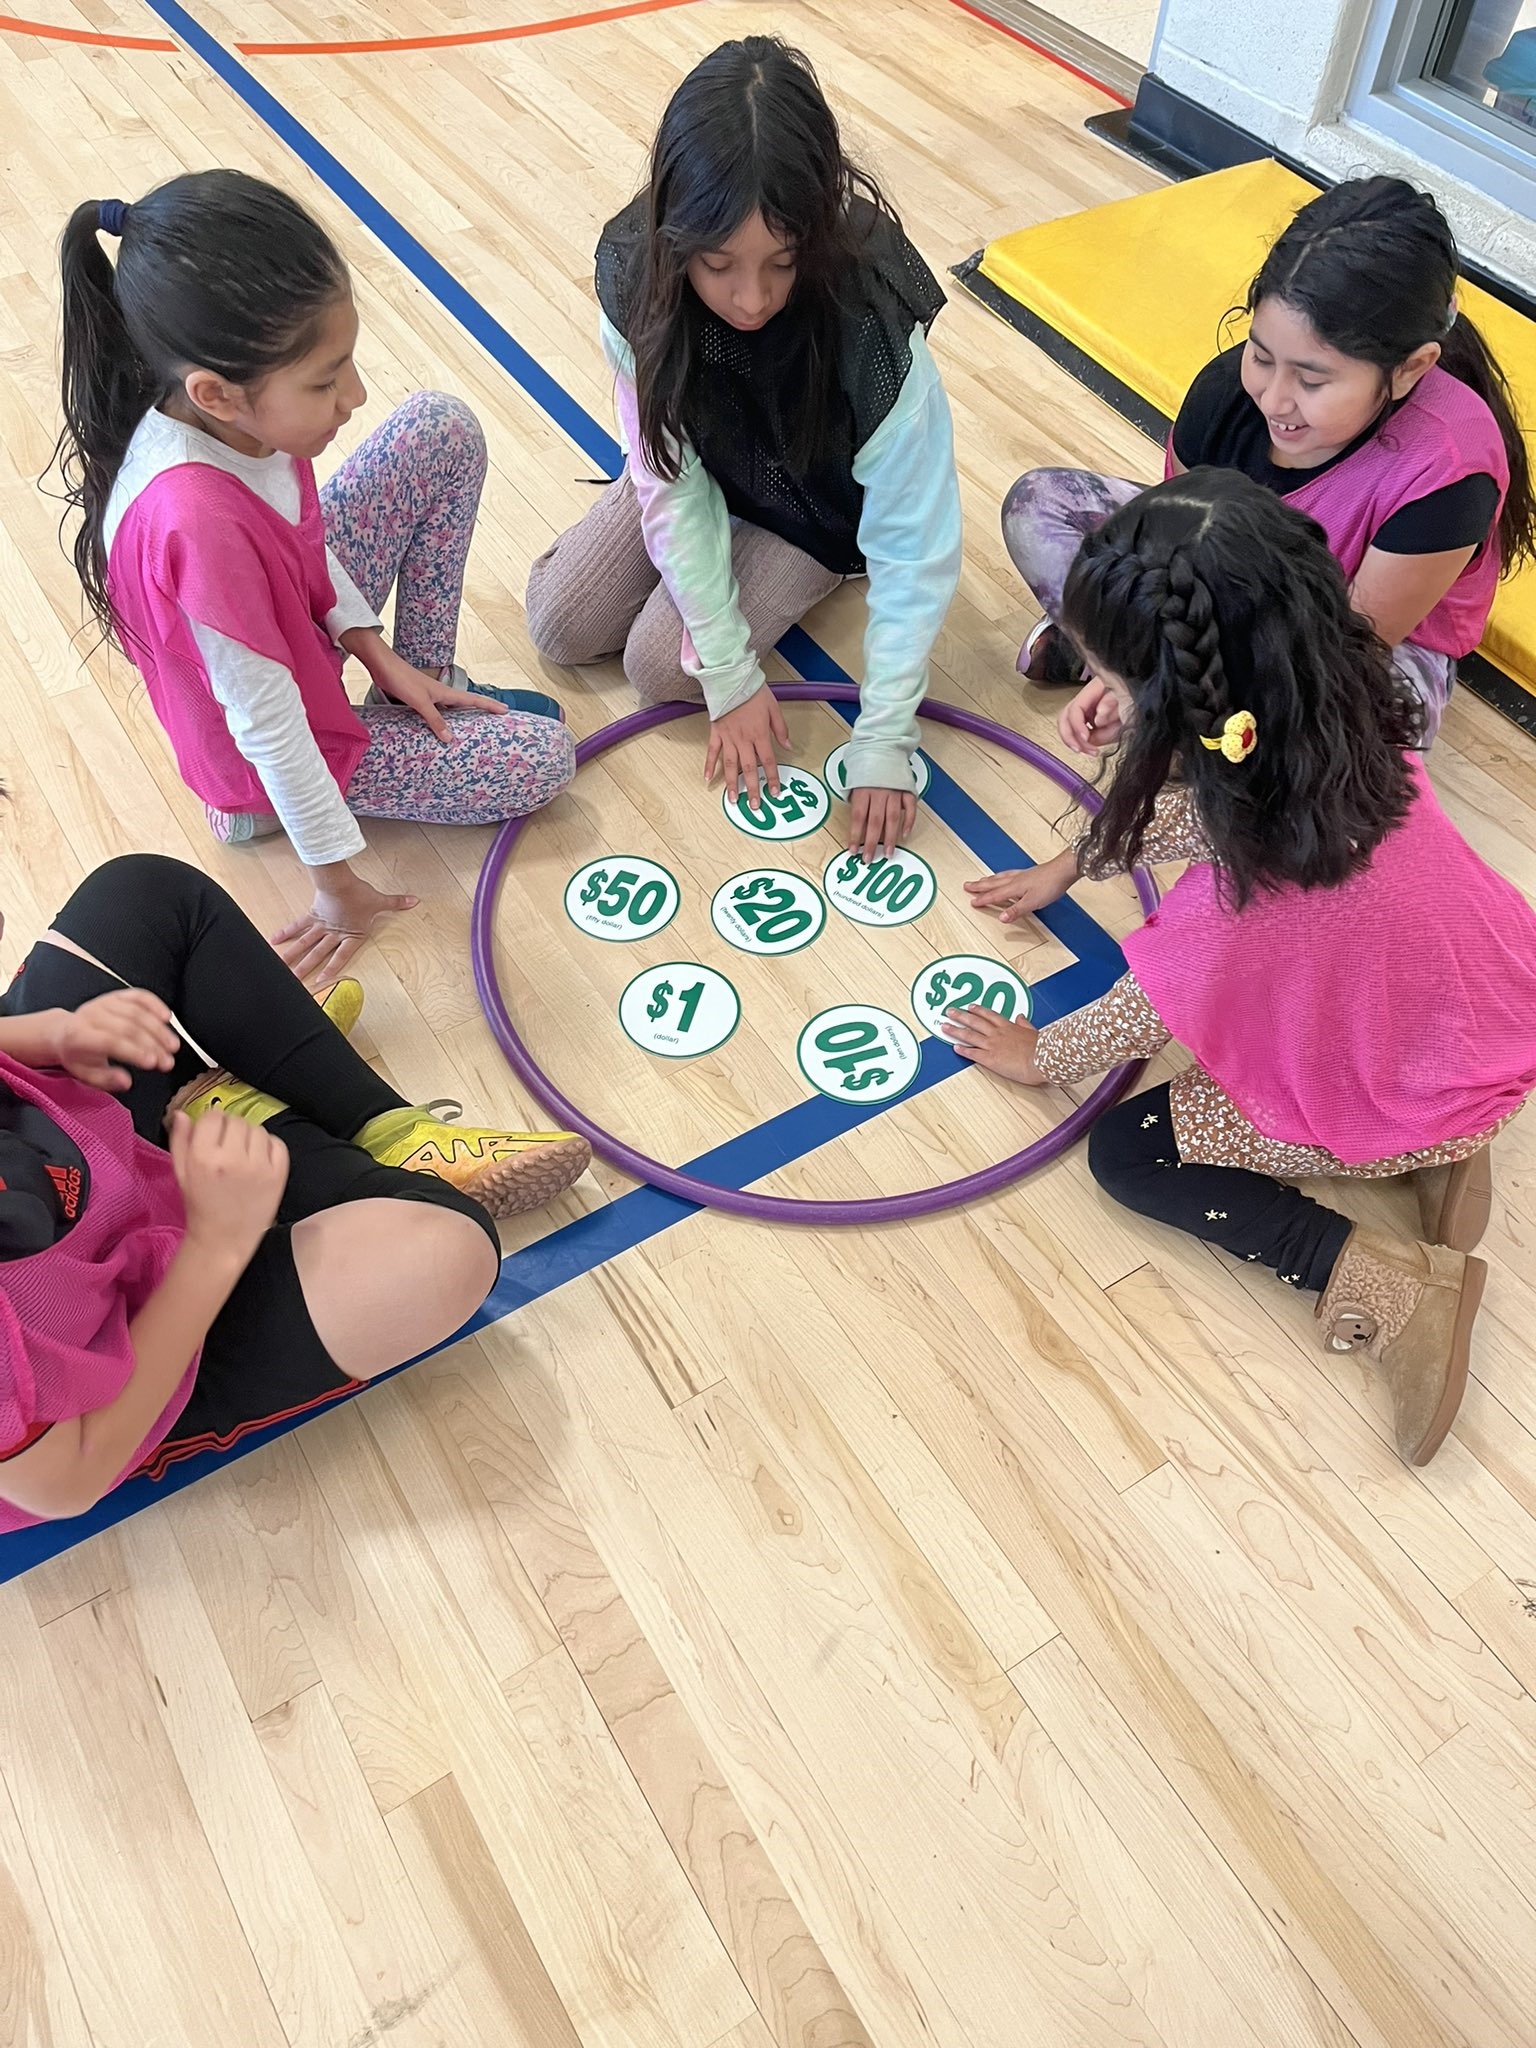 Project YES students playing a game on gym floor